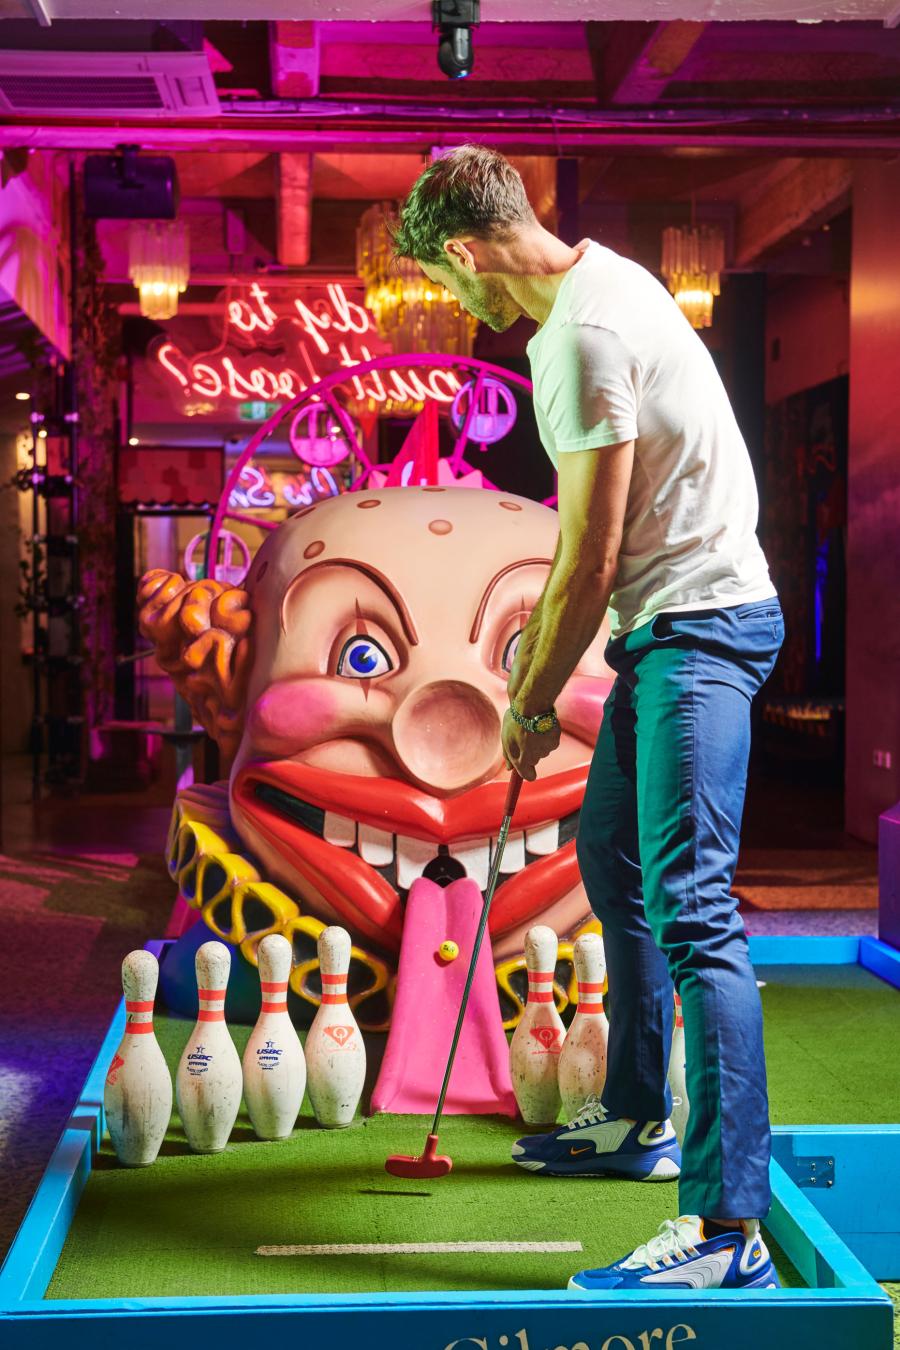 A mini golf player hit a mini golf that's going toward a wacky caricature with a wide mouth as an opening shot for a mini golf course at Holey Moley, a Funlab FEC brand